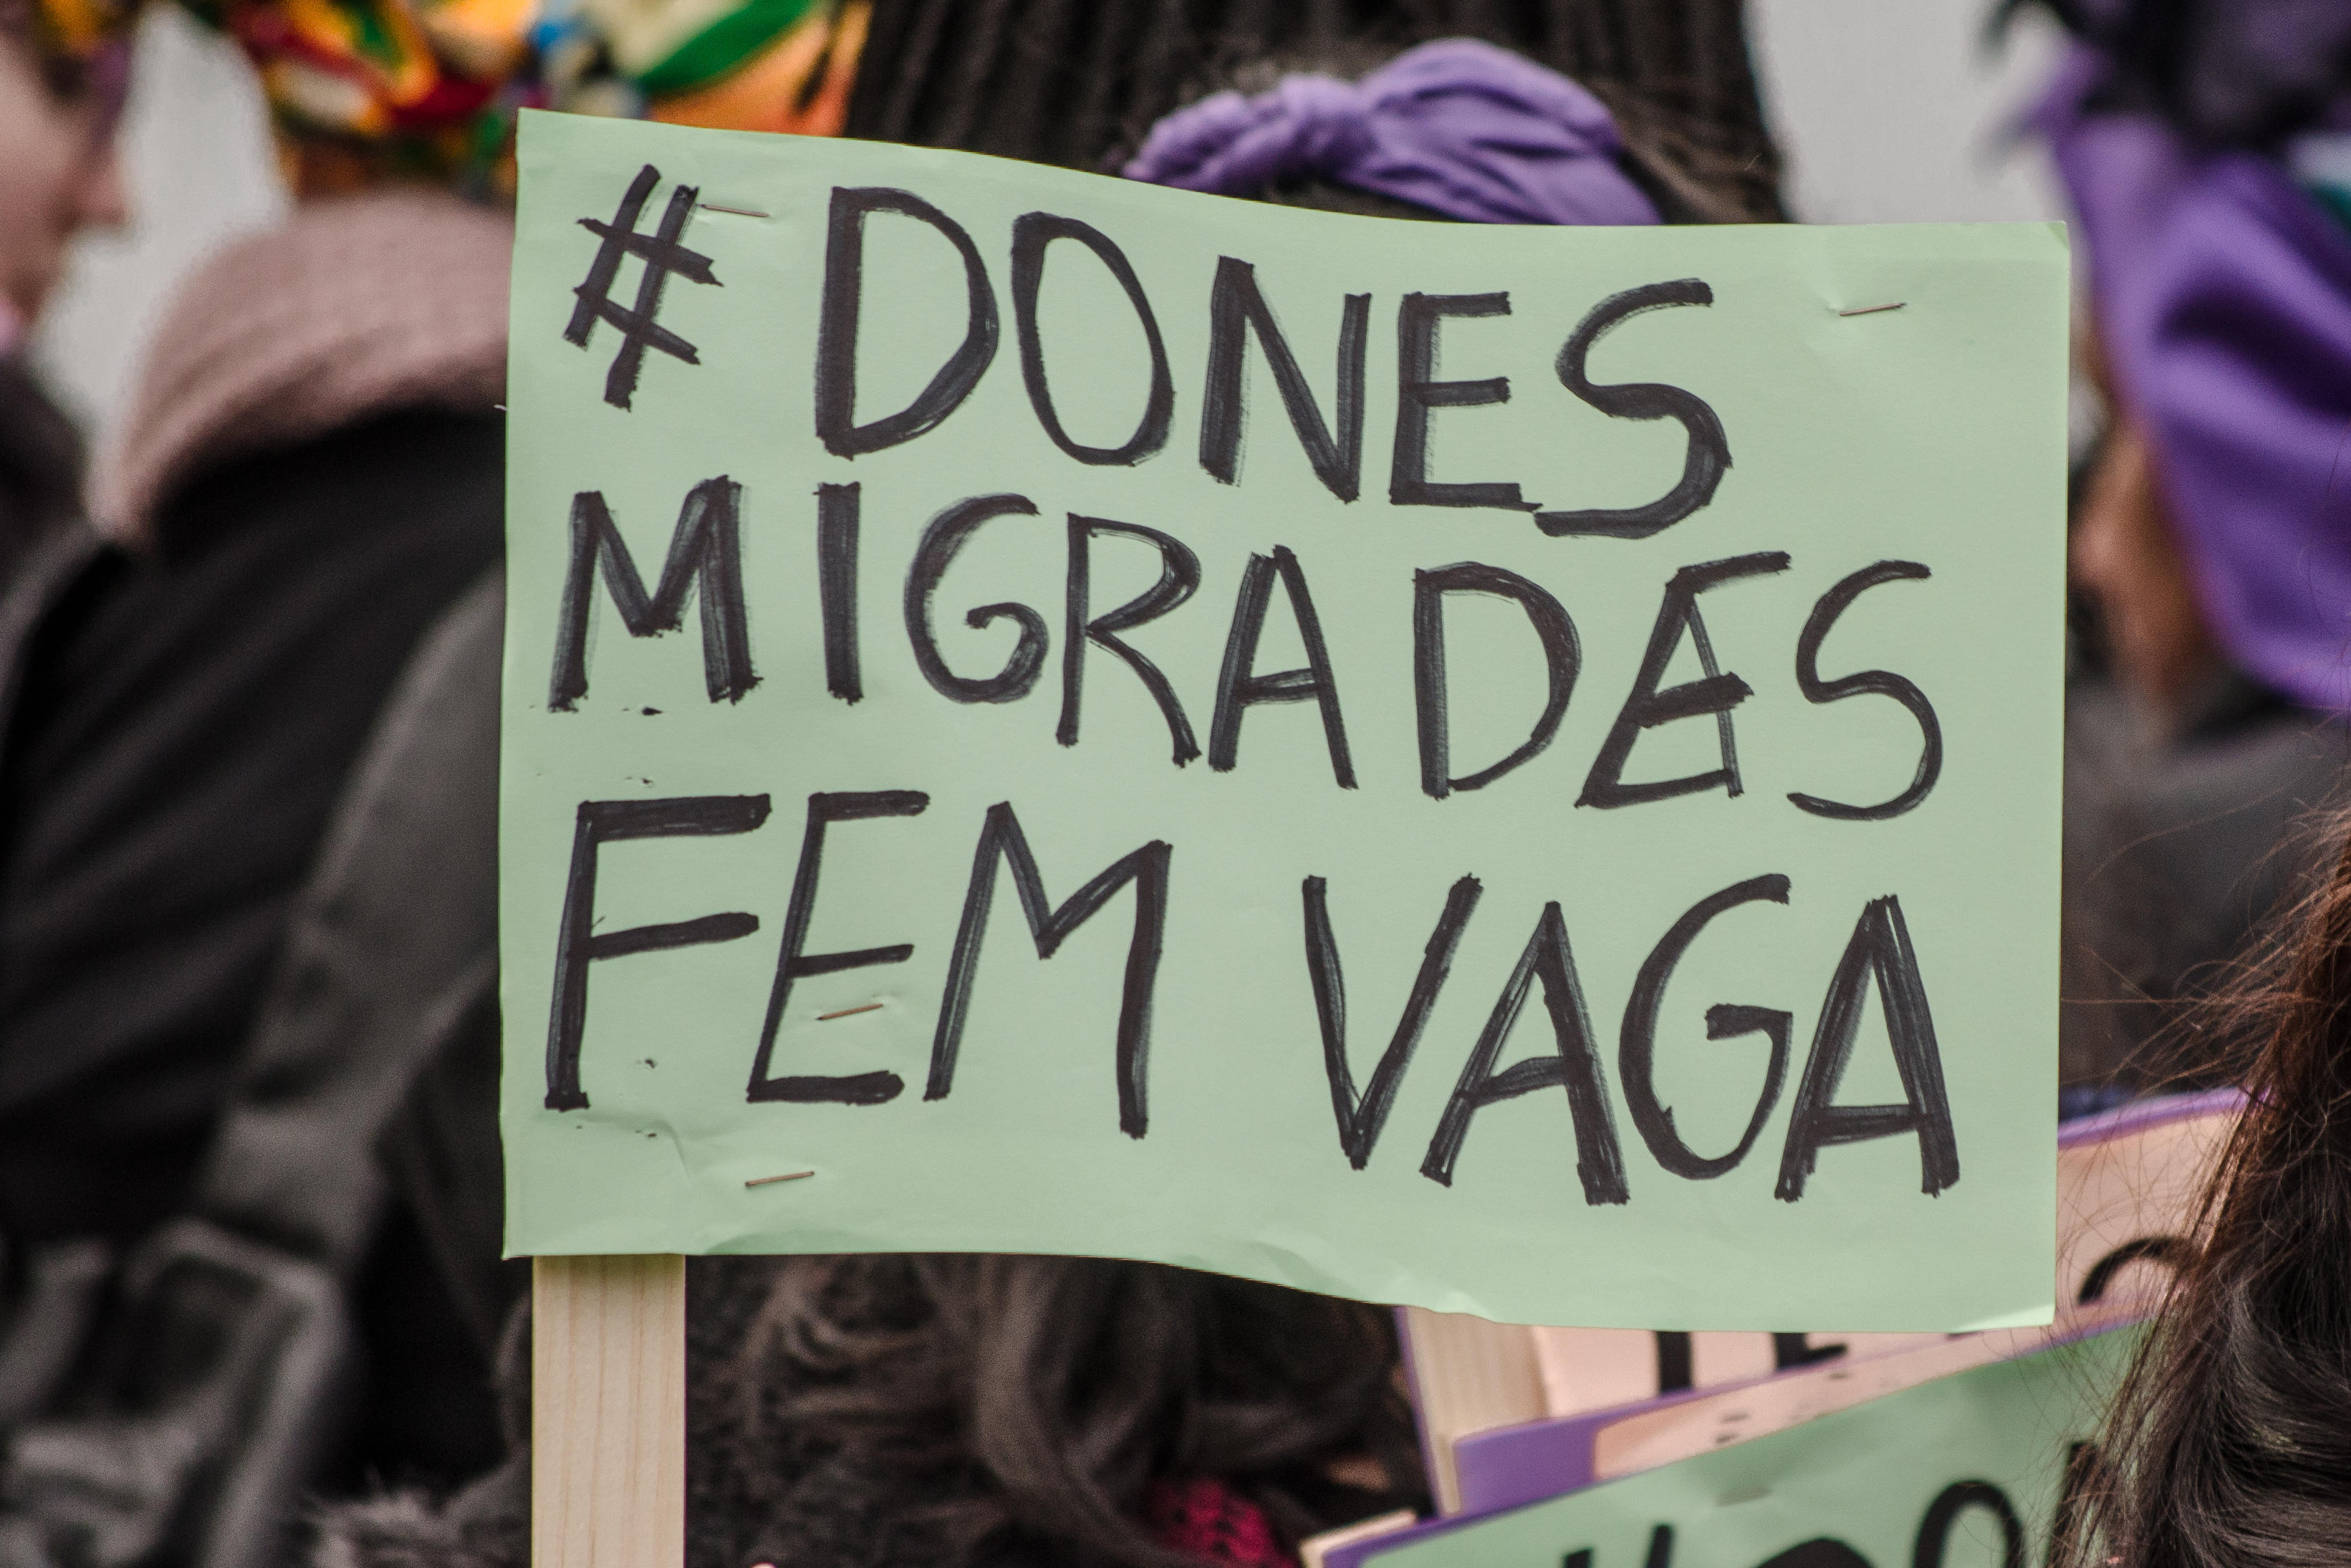 A protester seen displaying a poster relating to migrant women on strike. The Poster says 'Dones Migrades Fem vaga', 'Migrant women on the move'.